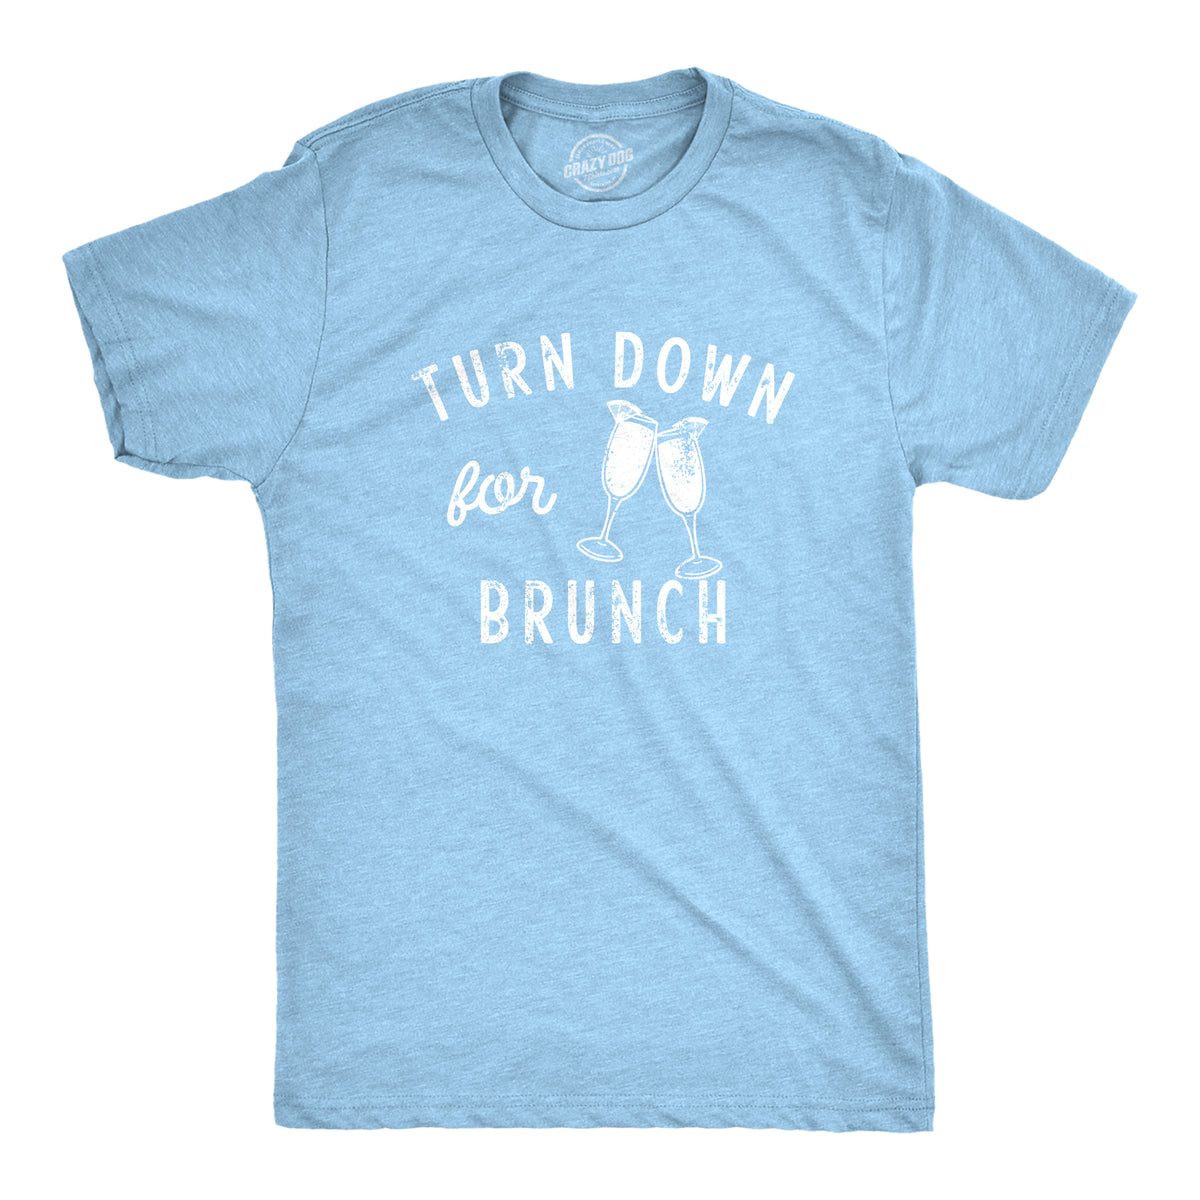 Funny Light Heather Blue - BRUNCH Turn Down For Brunch Mens T Shirt Nerdy Food Drinking Tee